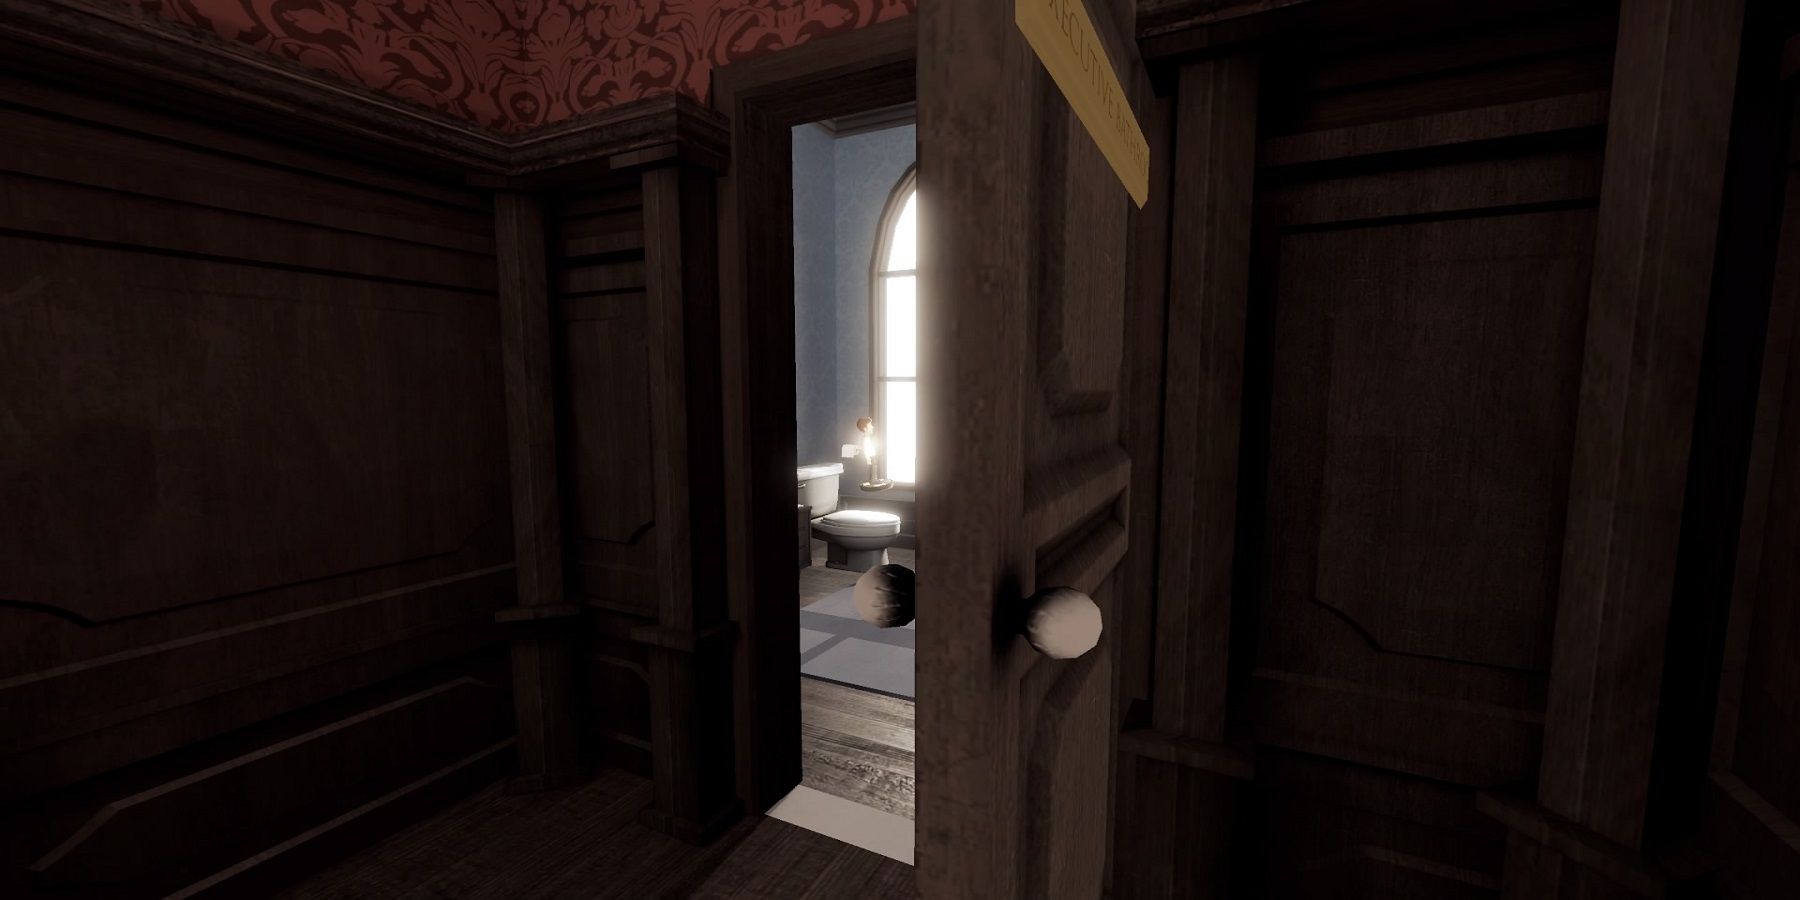 The Stanley Parable - Ultra Deluxe Figurine Washroom